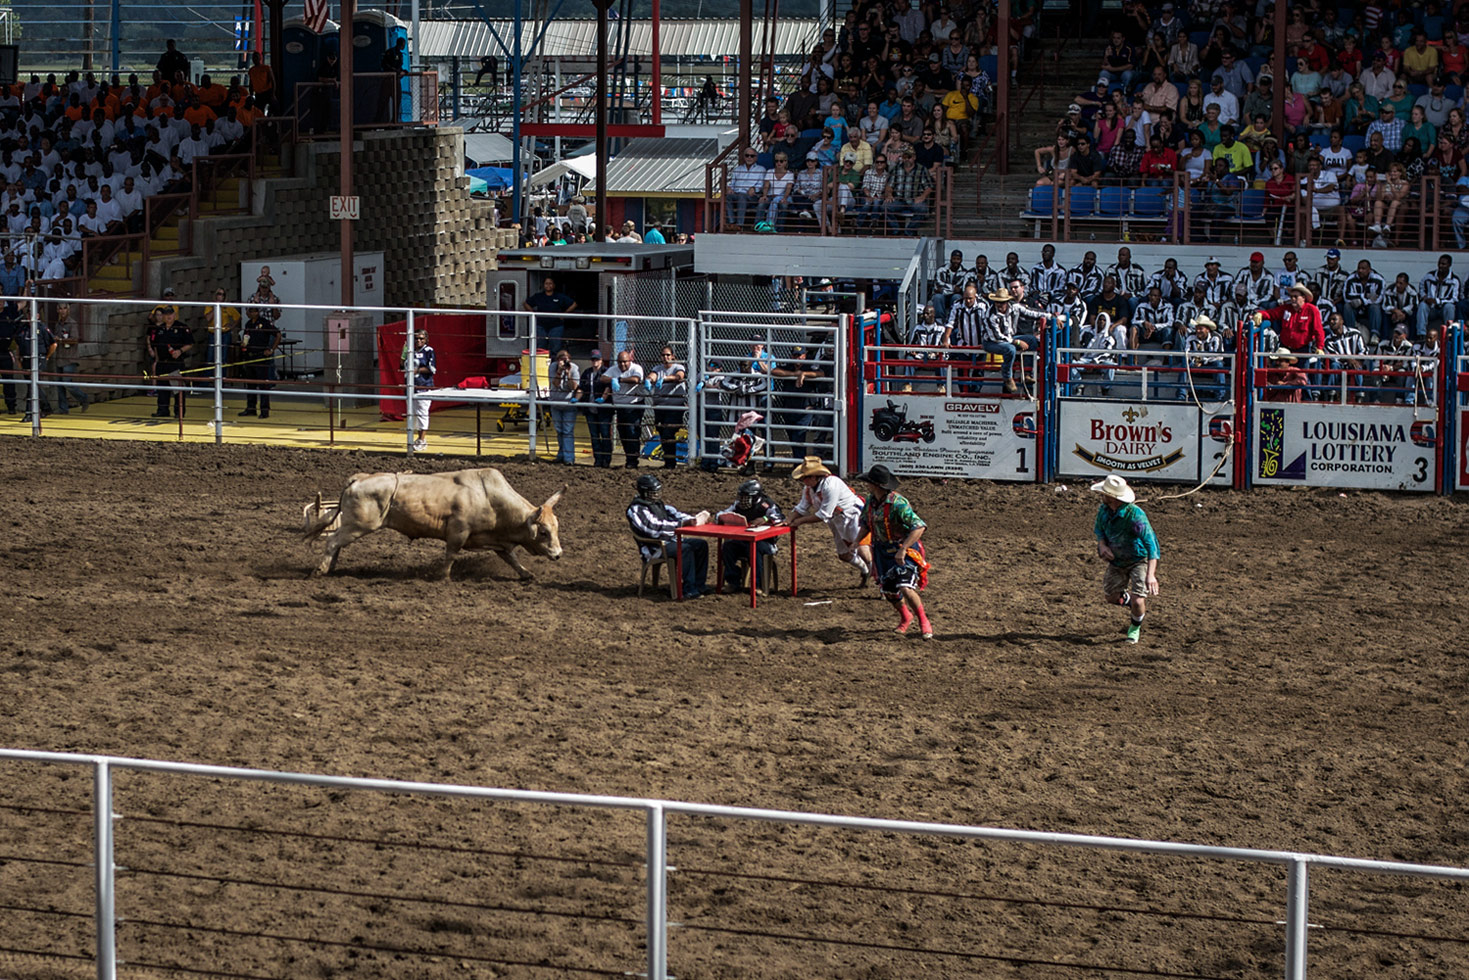 Events include wild horse racing (three-man teams attempt to grab ropes dragged by six wild horses long enough for a team member to mount), bull-dogging (wrestling an animal to the ground), wild cow milking (exactly what it sounds like), and bull riding (participants must sit on a one-ton Brahma bull for six seconds.)